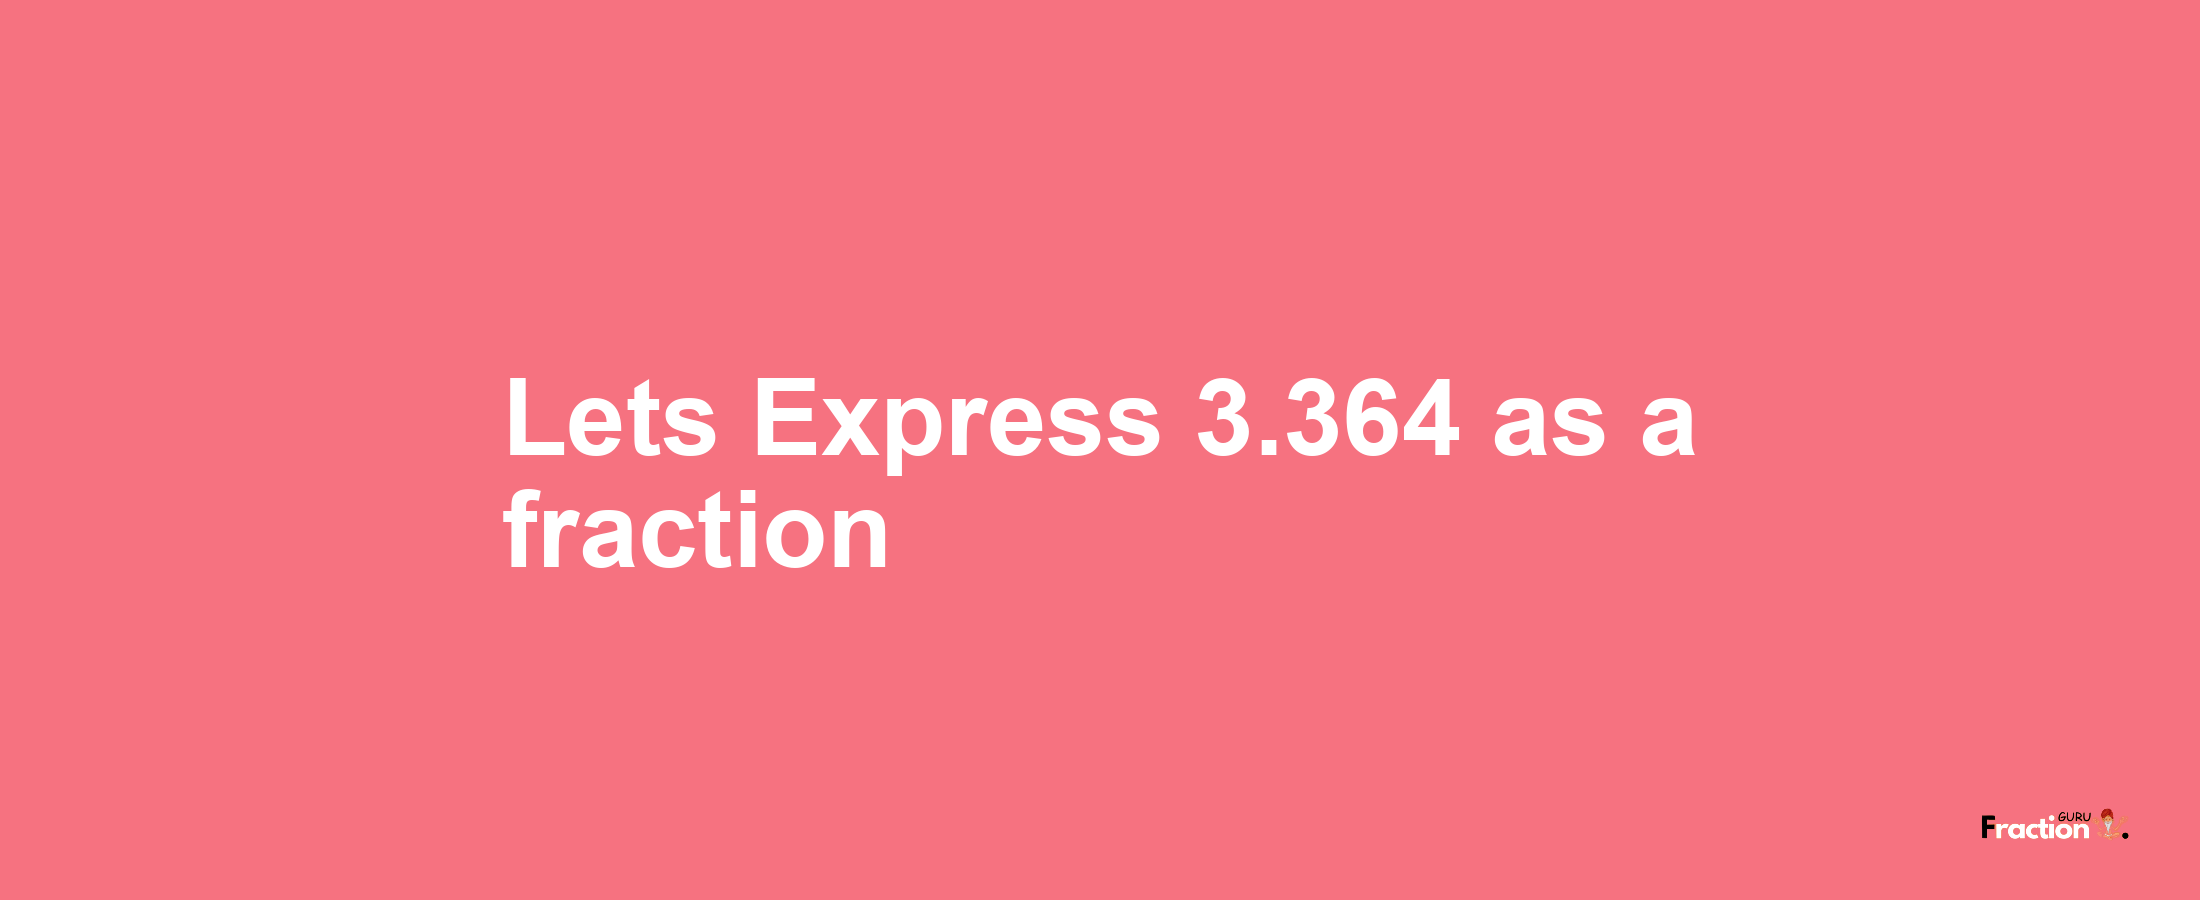 Lets Express 3.364 as afraction